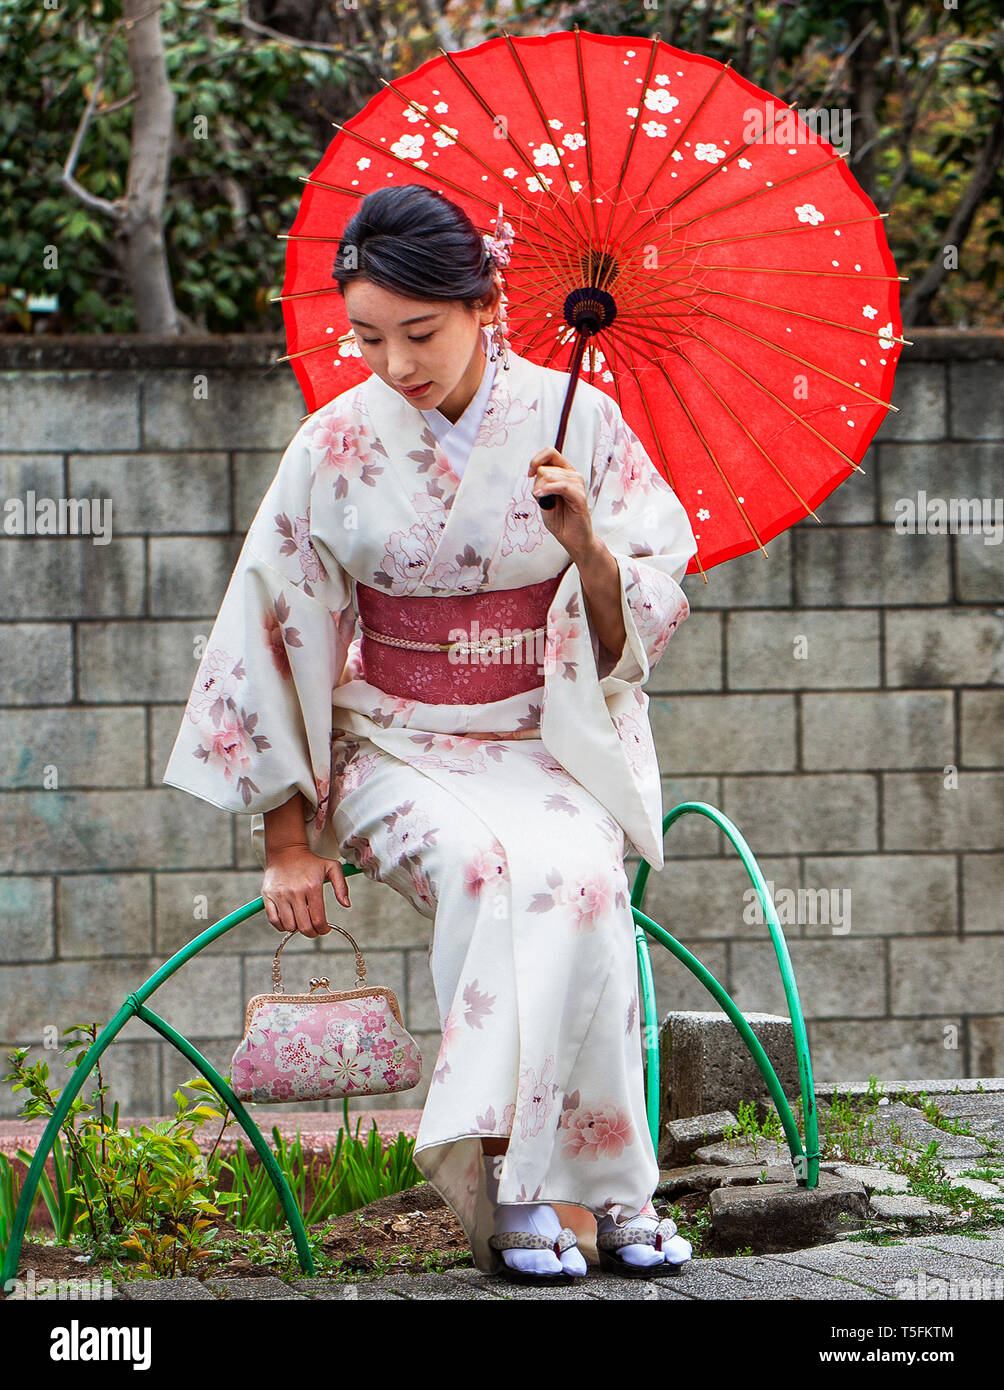 Beautiful Japanese woman in white kimono with red sash and red umbrella in  a park next to a cherry blossom tree Stock Photo - Alamy